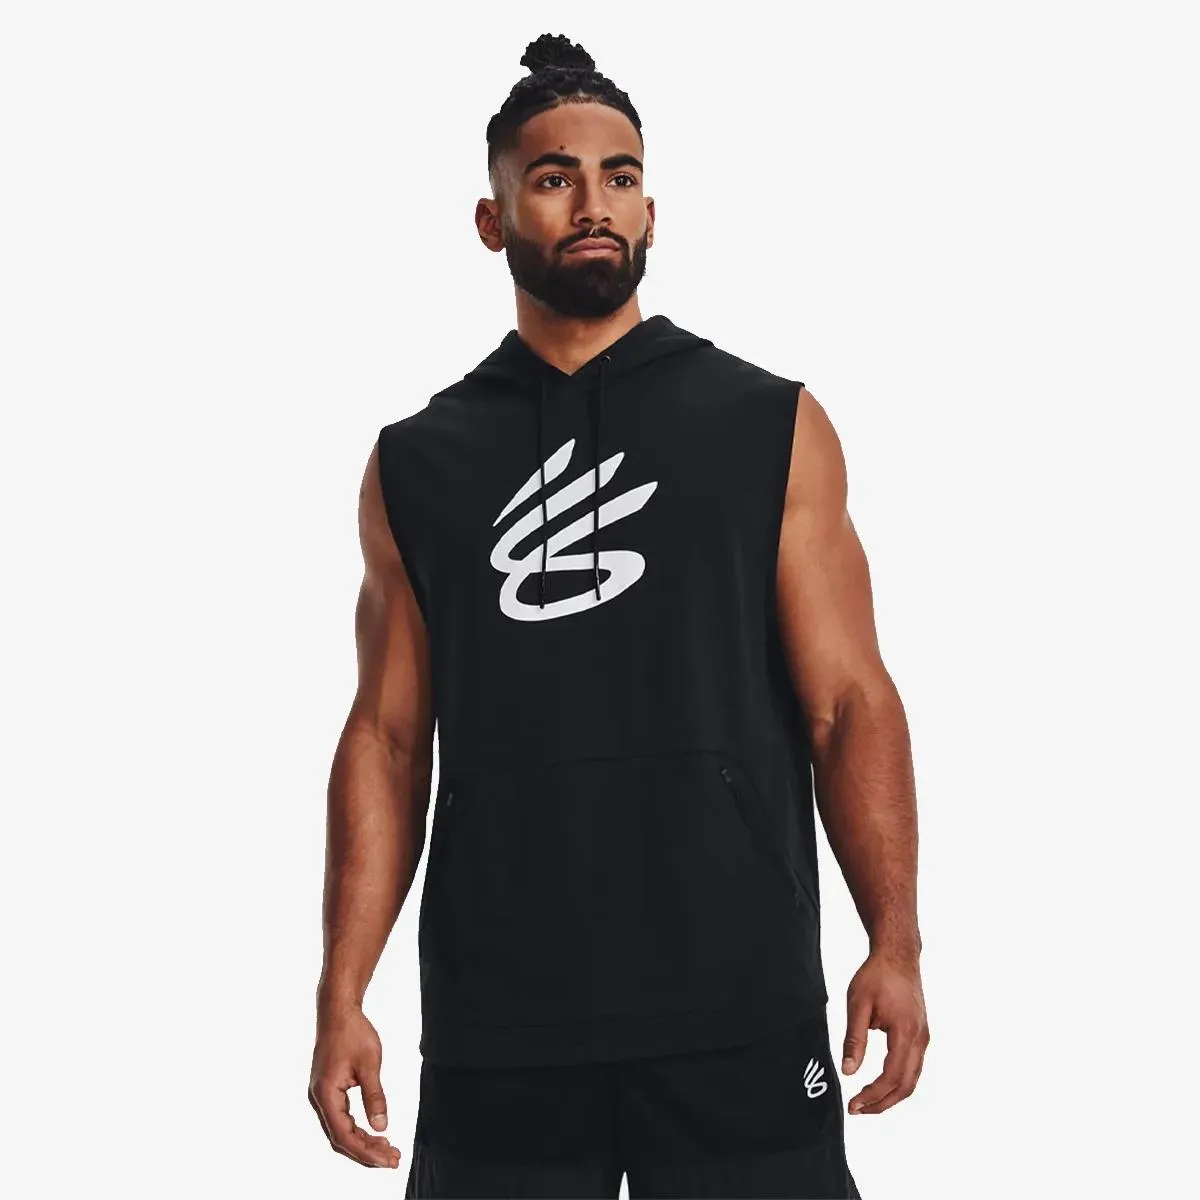 Under Armour CURRY SLEEVELESS  HOODIE 